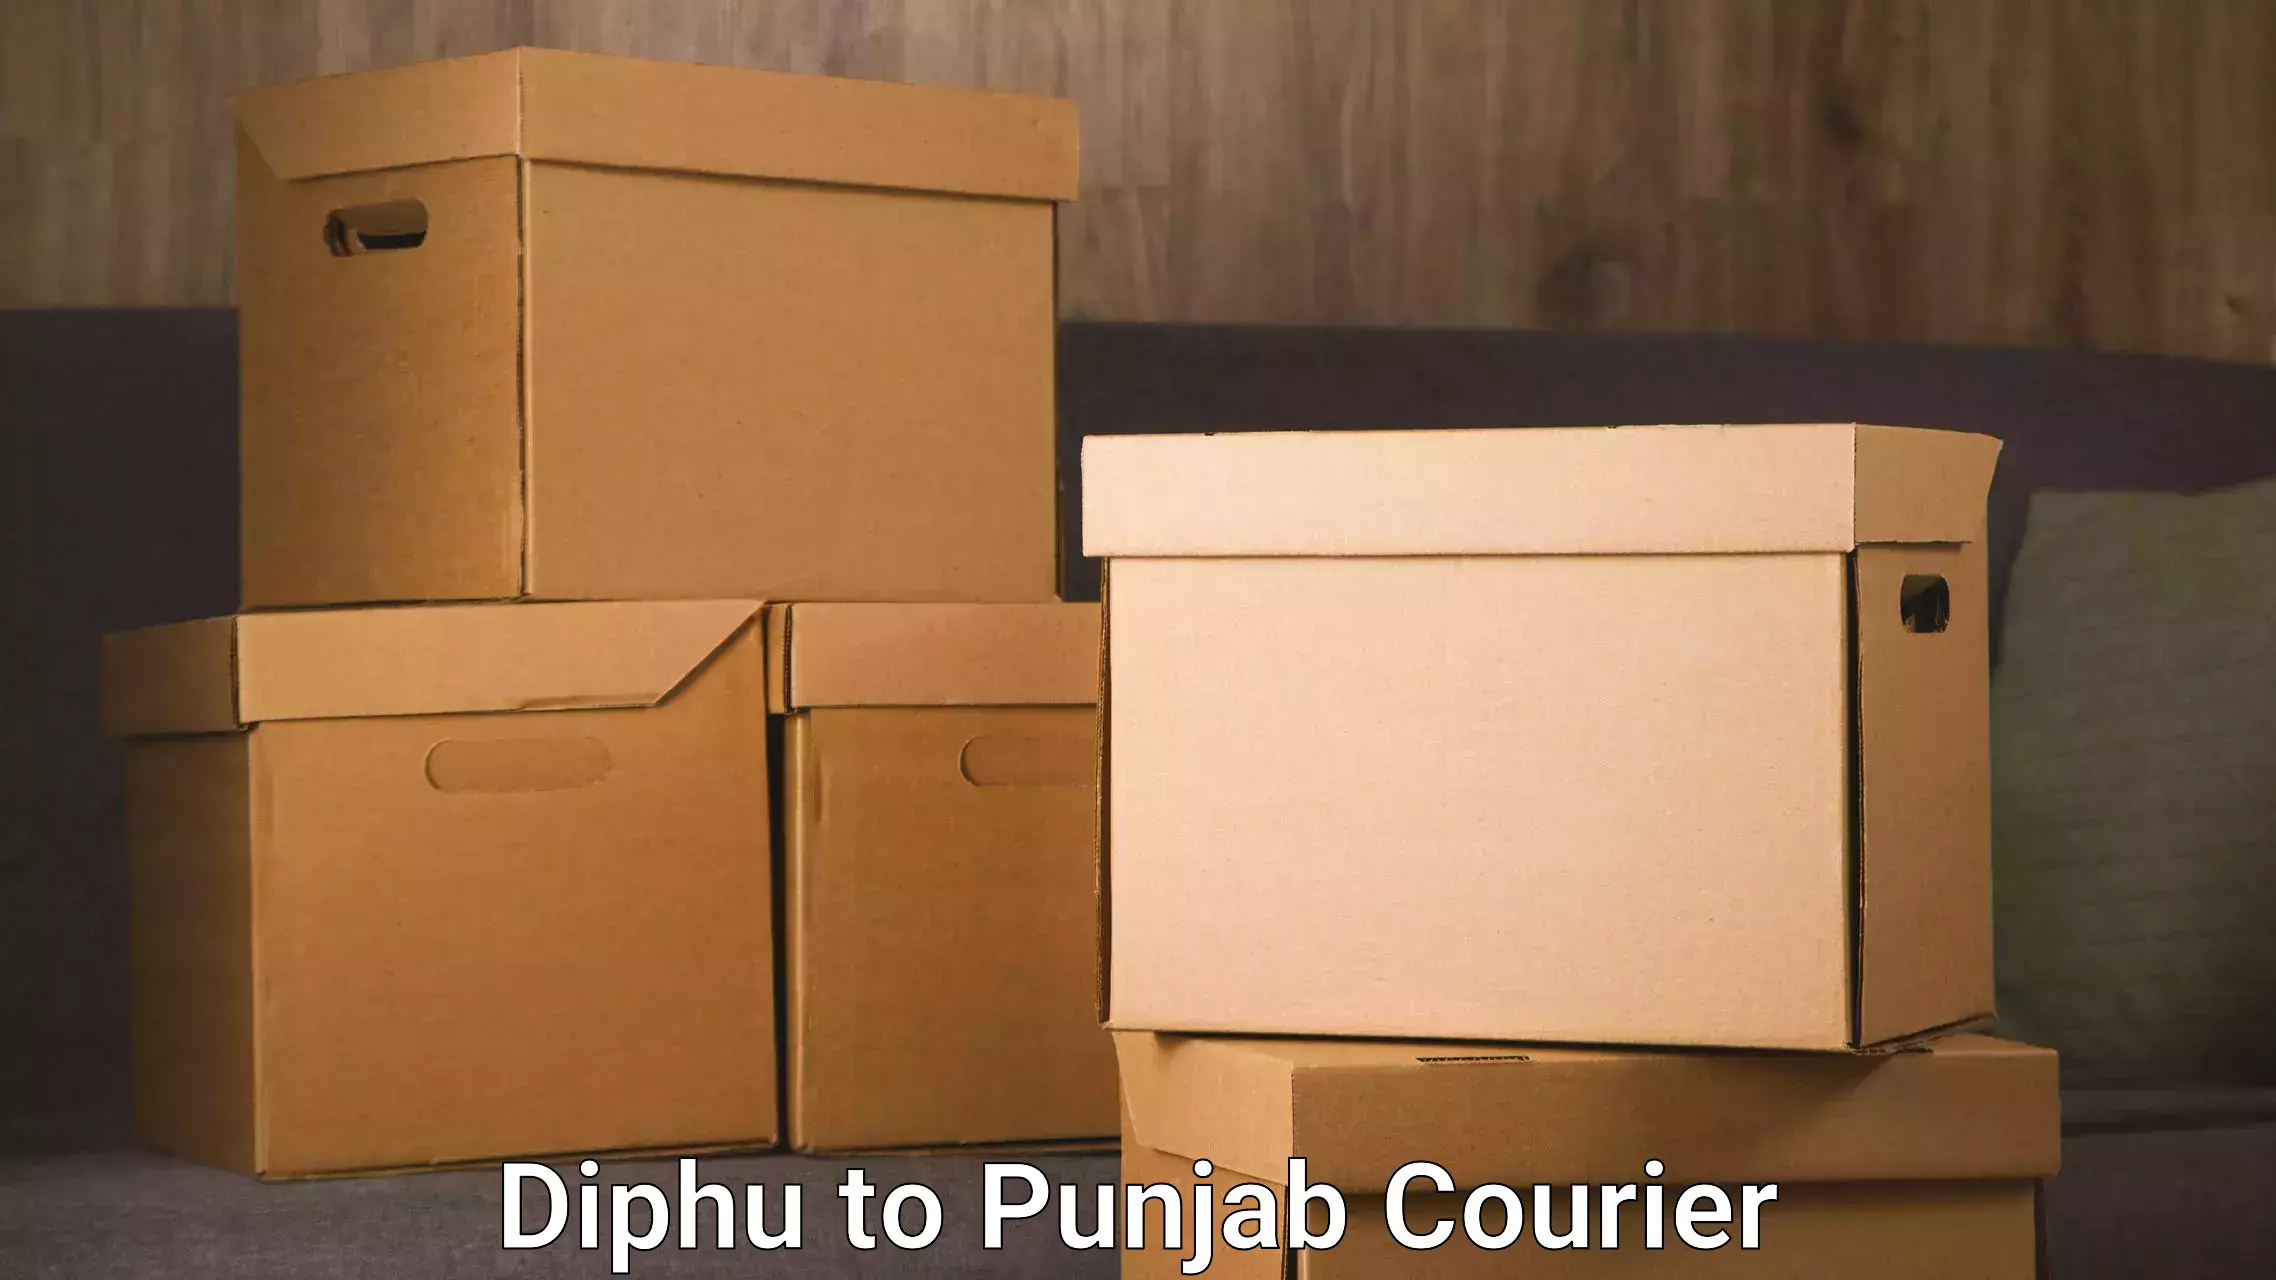 Reliable courier services Diphu to Mandi Gobindgarh